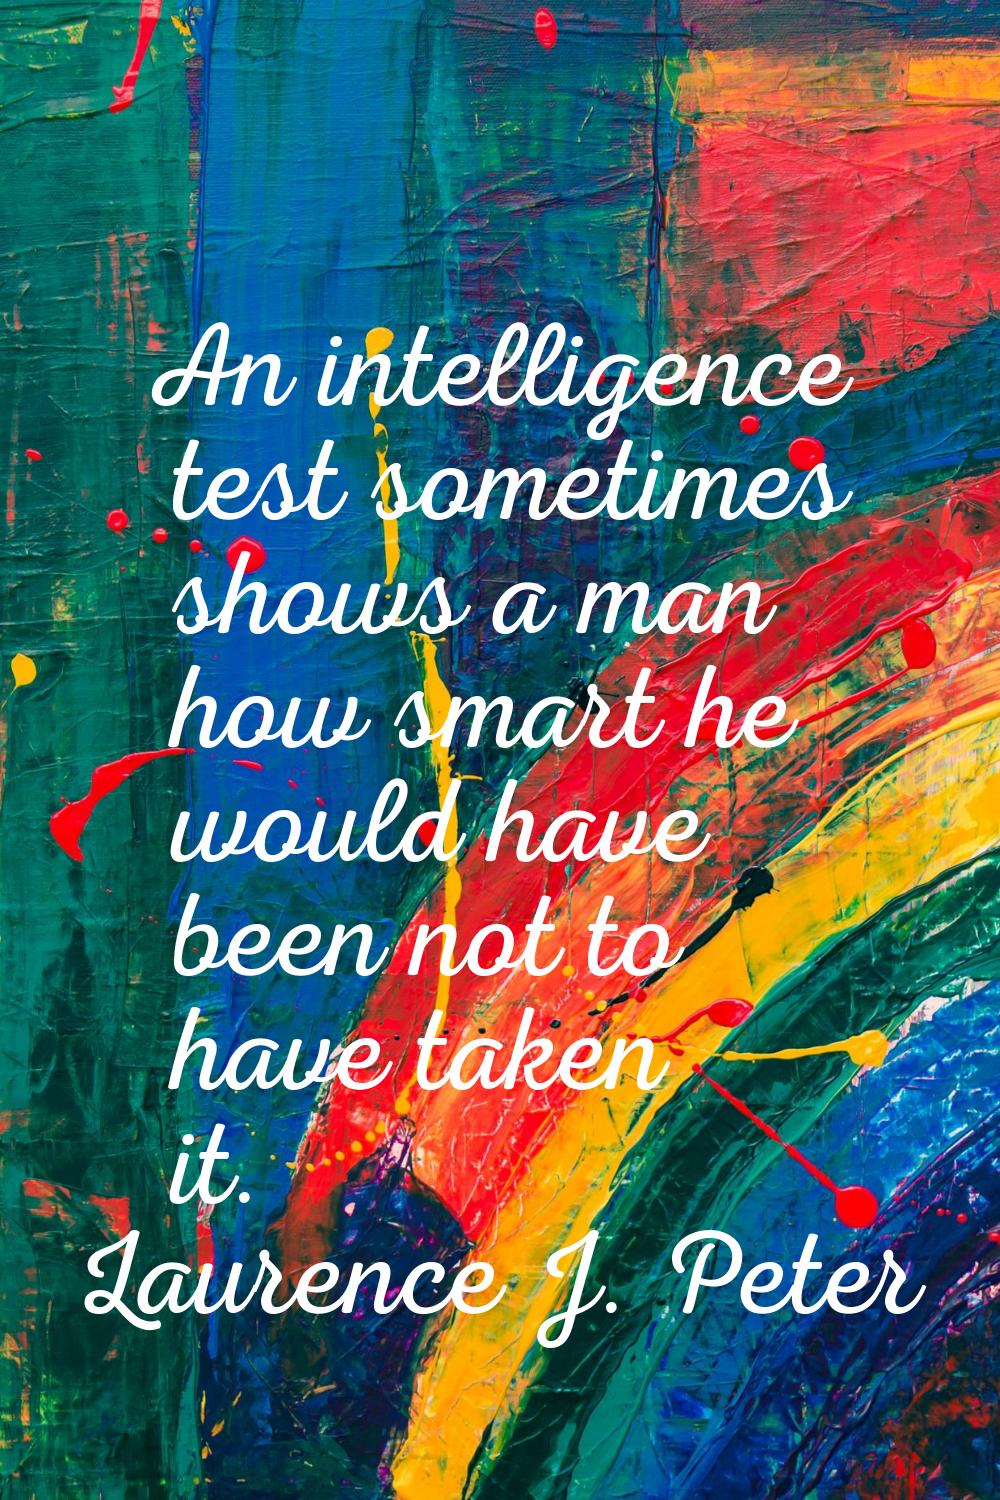 An intelligence test sometimes shows a man how smart he would have been not to have taken it.